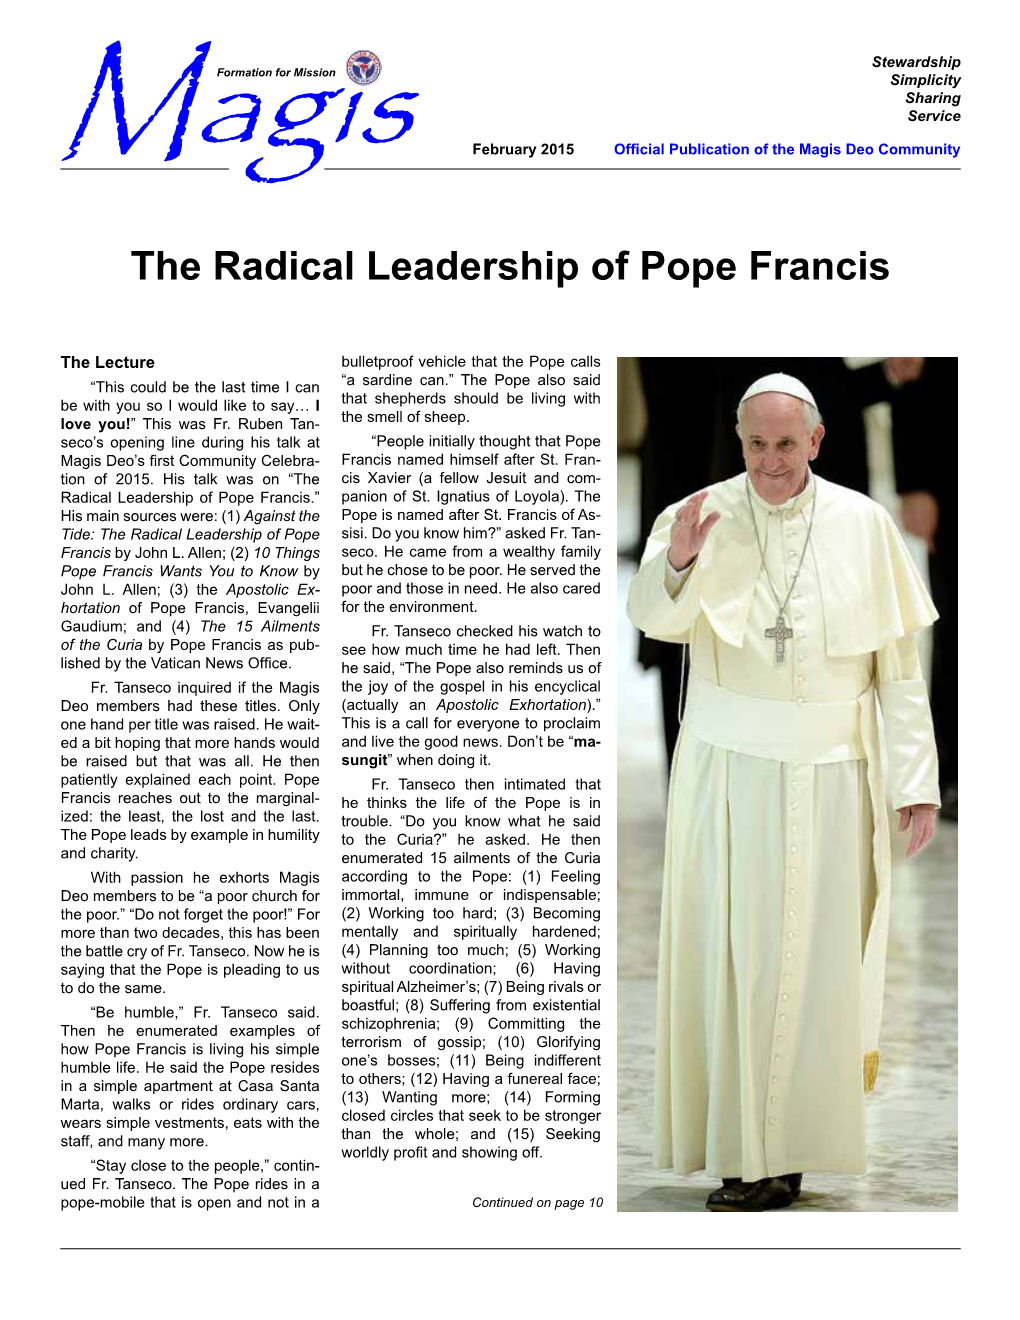 The Radical Leadership of Pope Francis